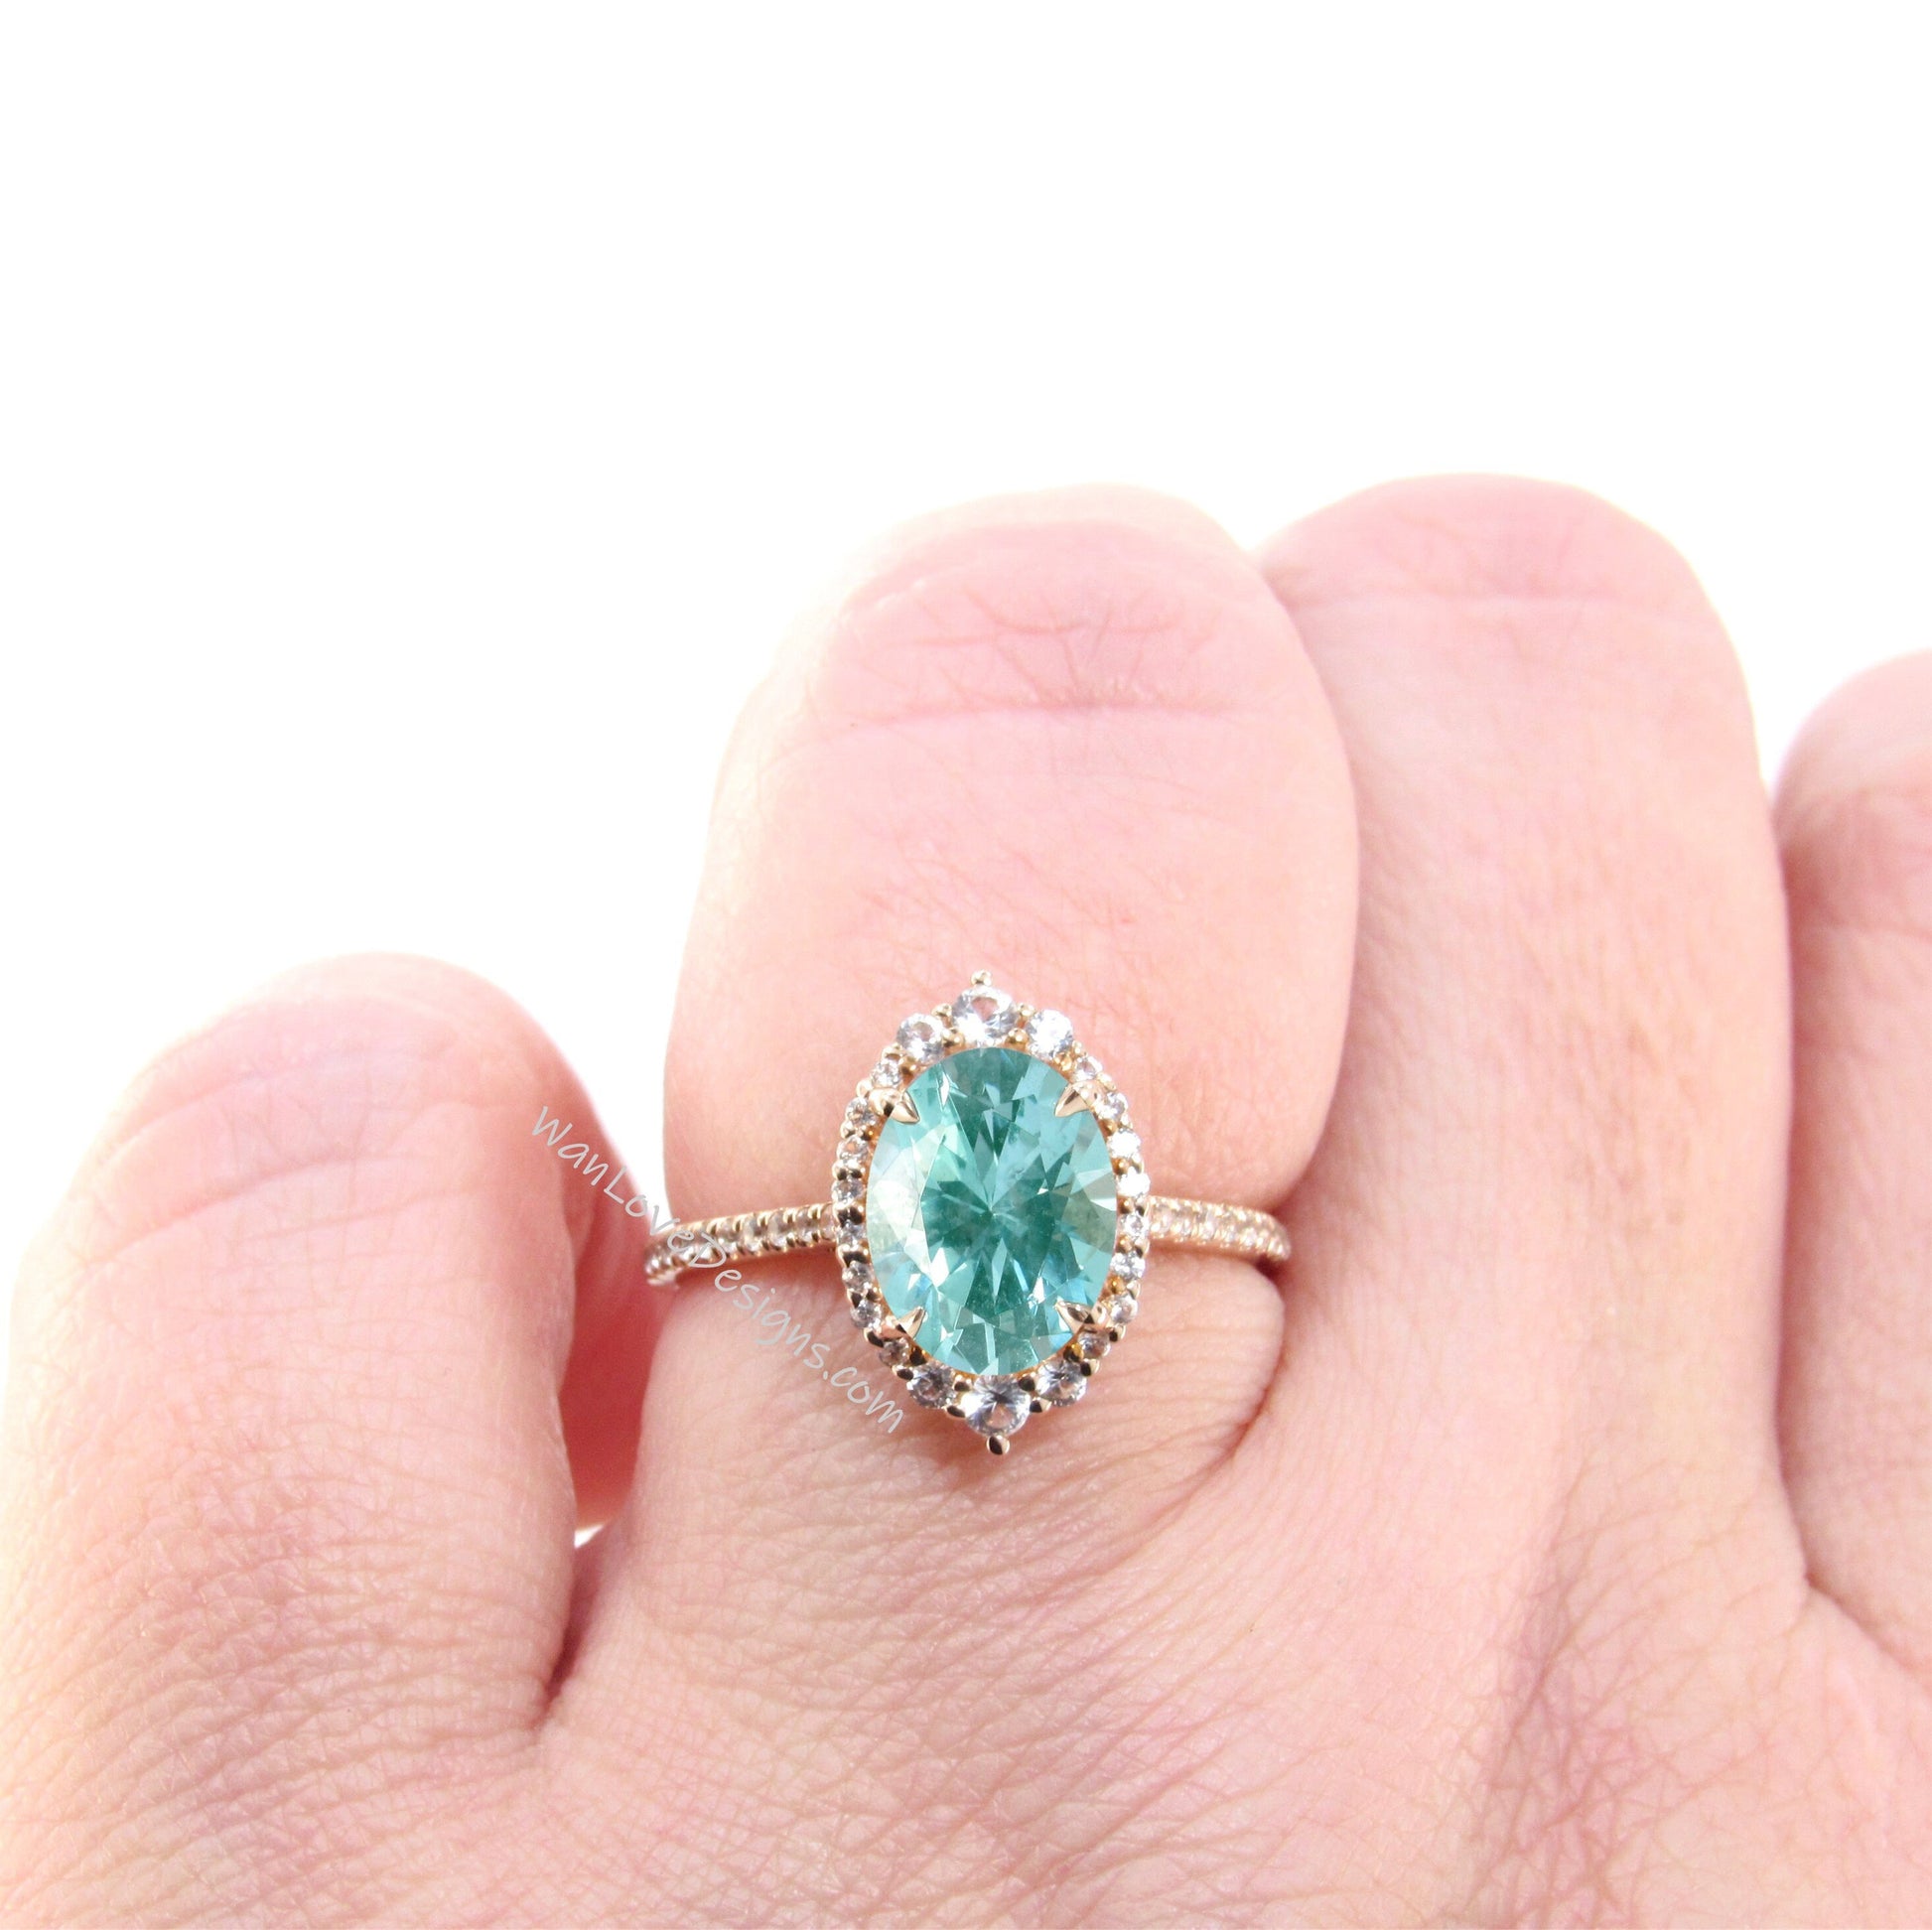 Vintage engagement ring oval cut Teal Spinel ring rose gold Diamond halo ring Art deco wedding Unique ring Anniversary ring lab emerald ring